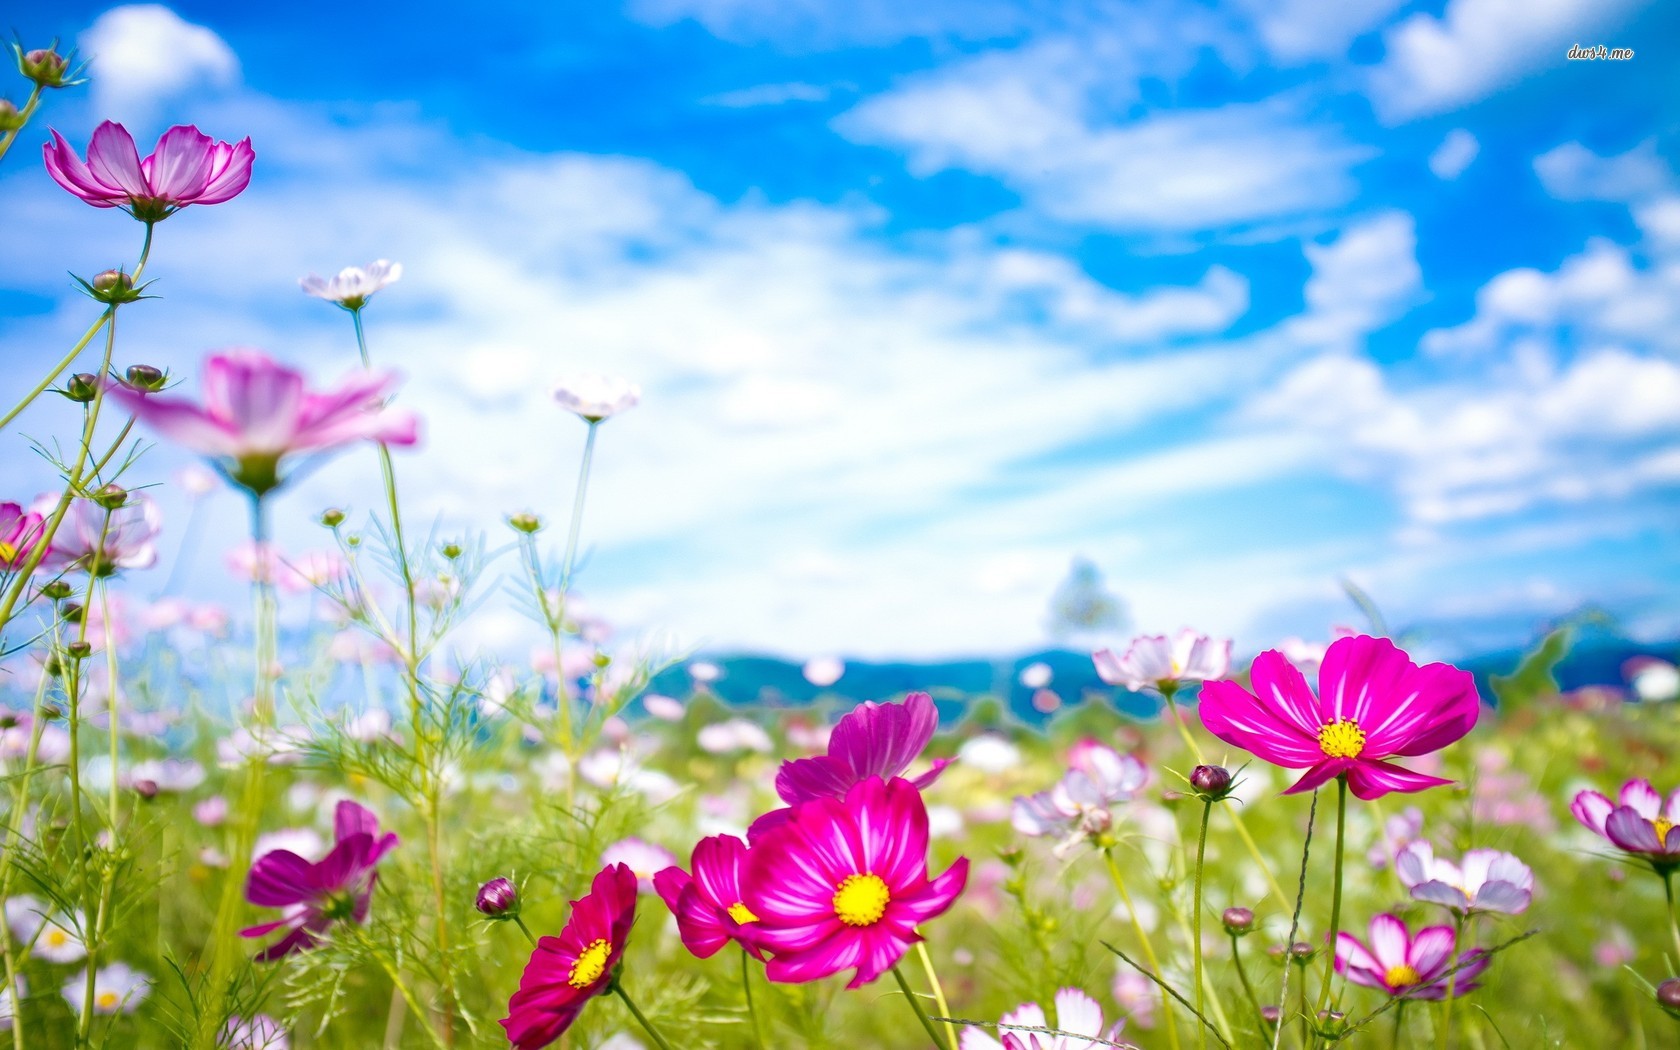 30 Beautiful Flower Images Free To Download